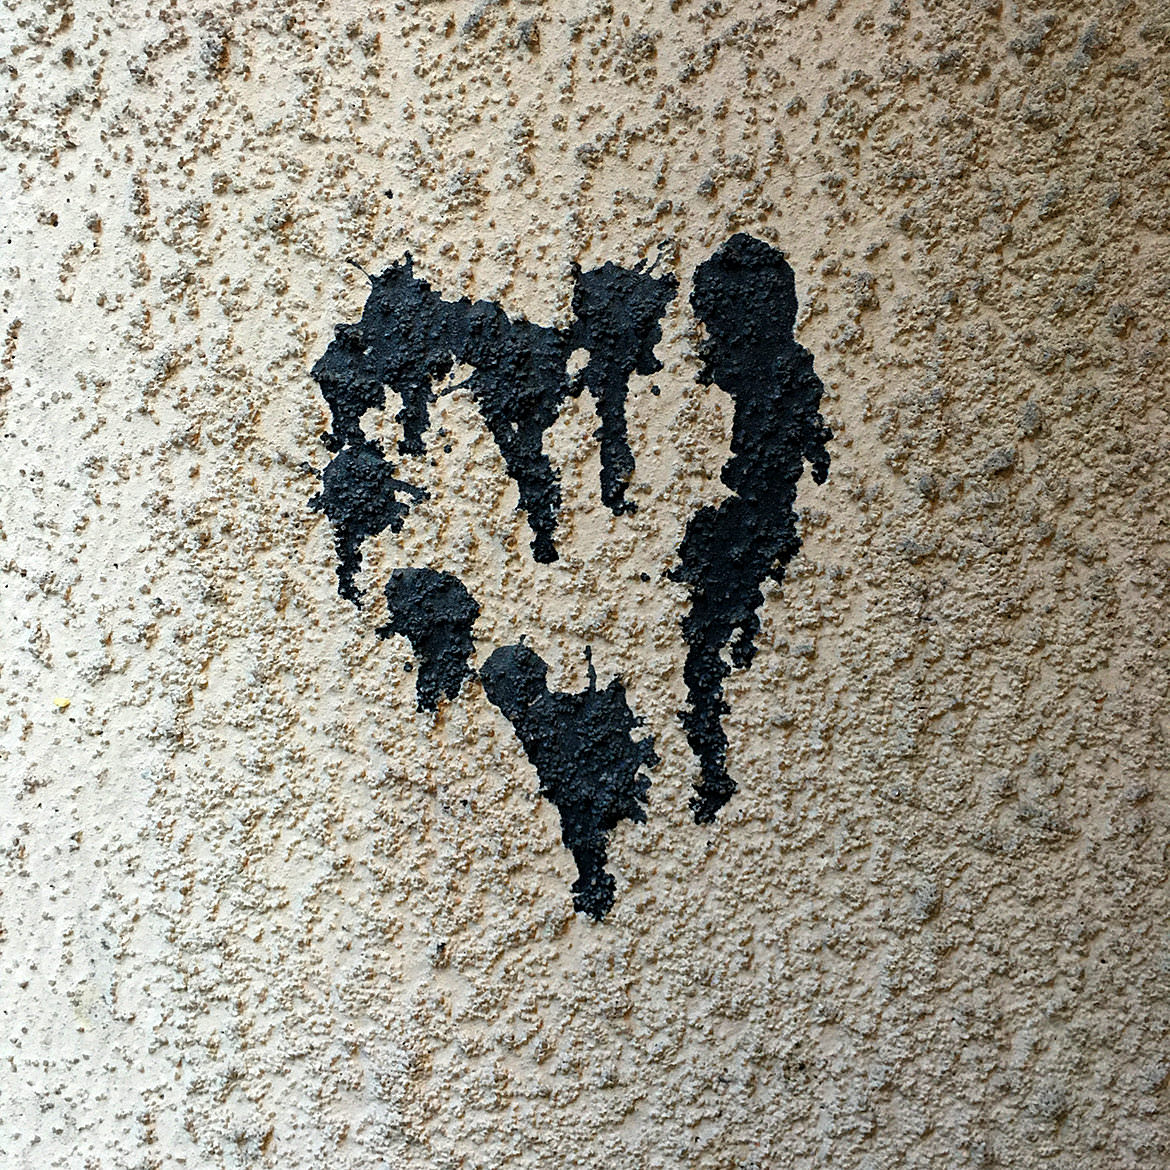 A black heart shape made of industrial glue remains on a stucco wall